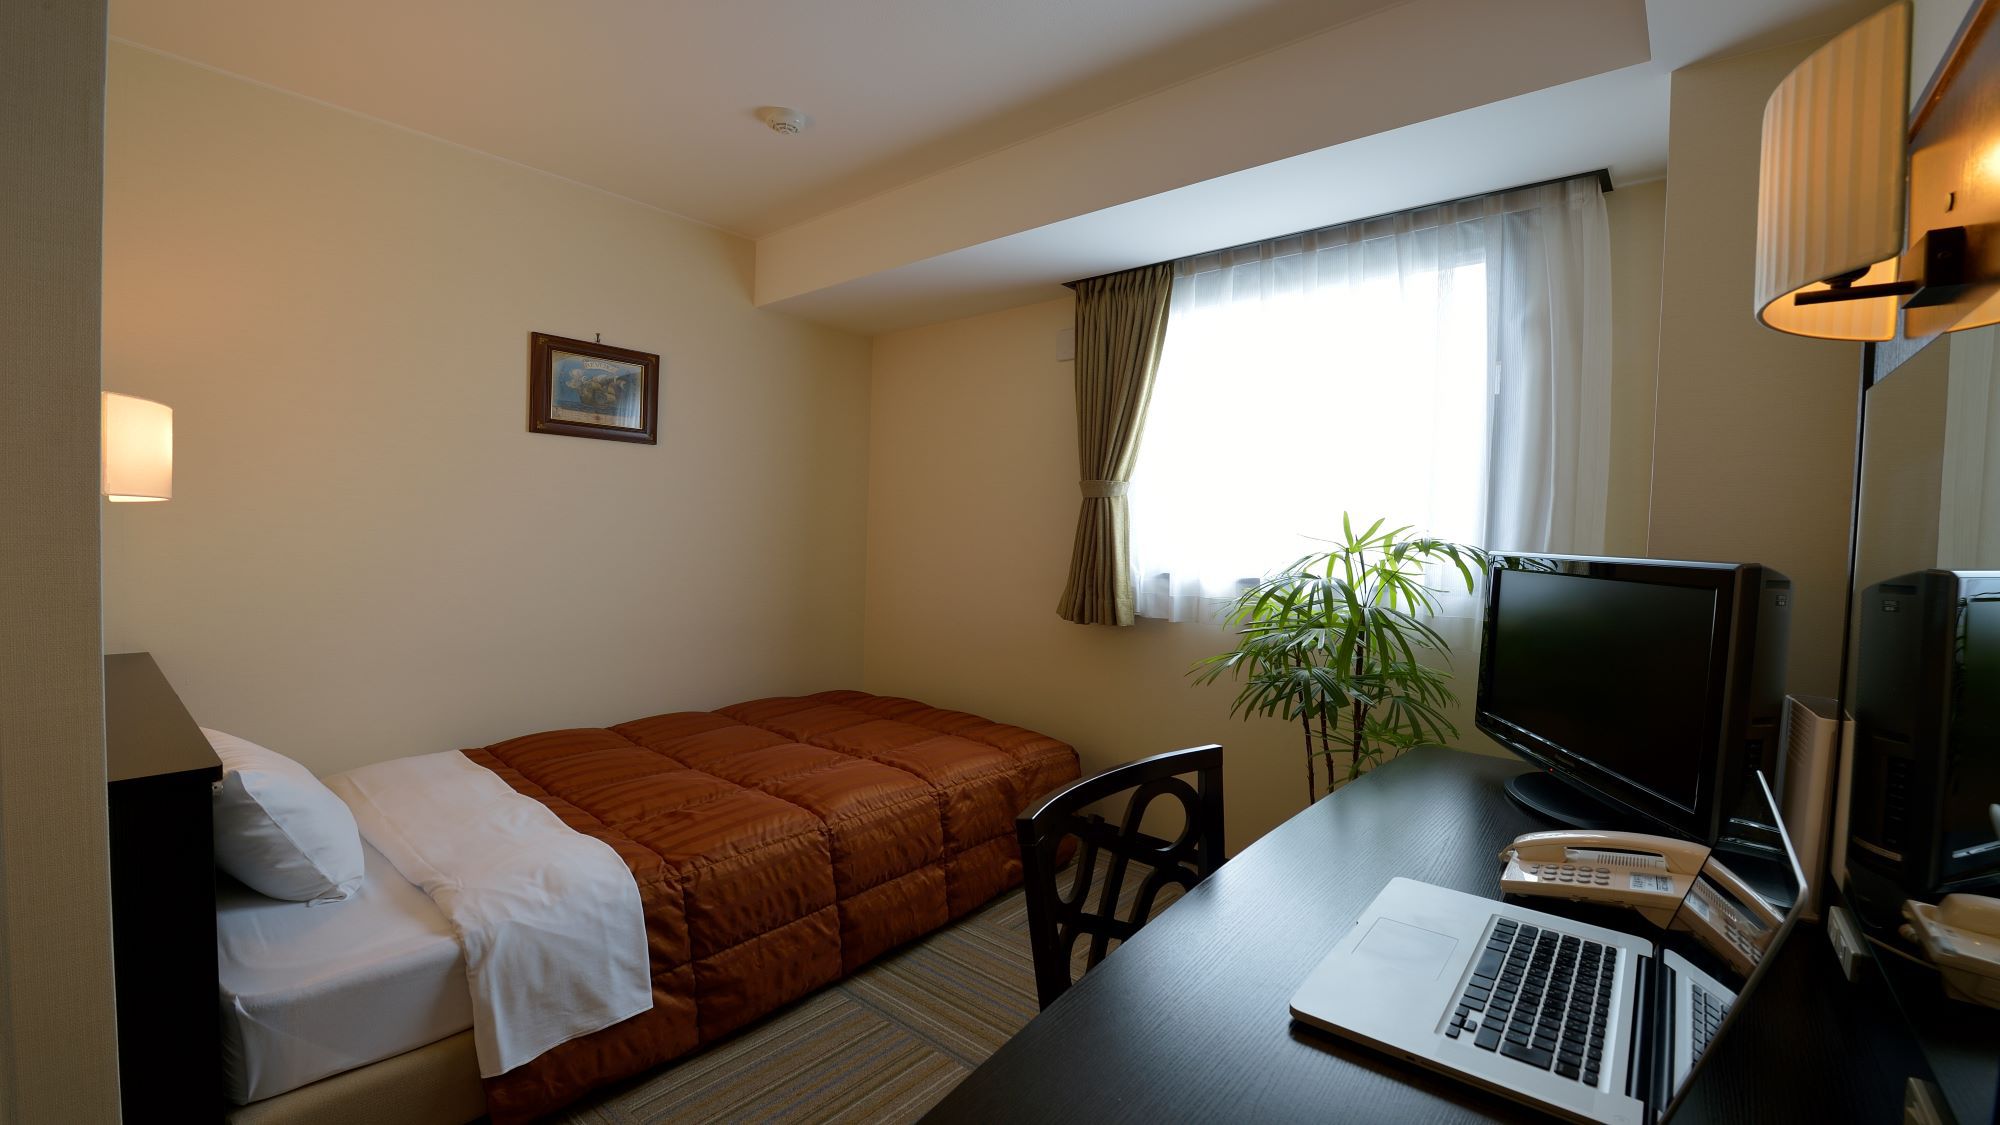 Hotel Gen Hamamatsu Inter Hotel Gen Hamamatsu Inter is a popular choice amongst travelers in Hamamatsu, whether exploring or just passing through. The property offers guests a range of services and amenities designed to provid